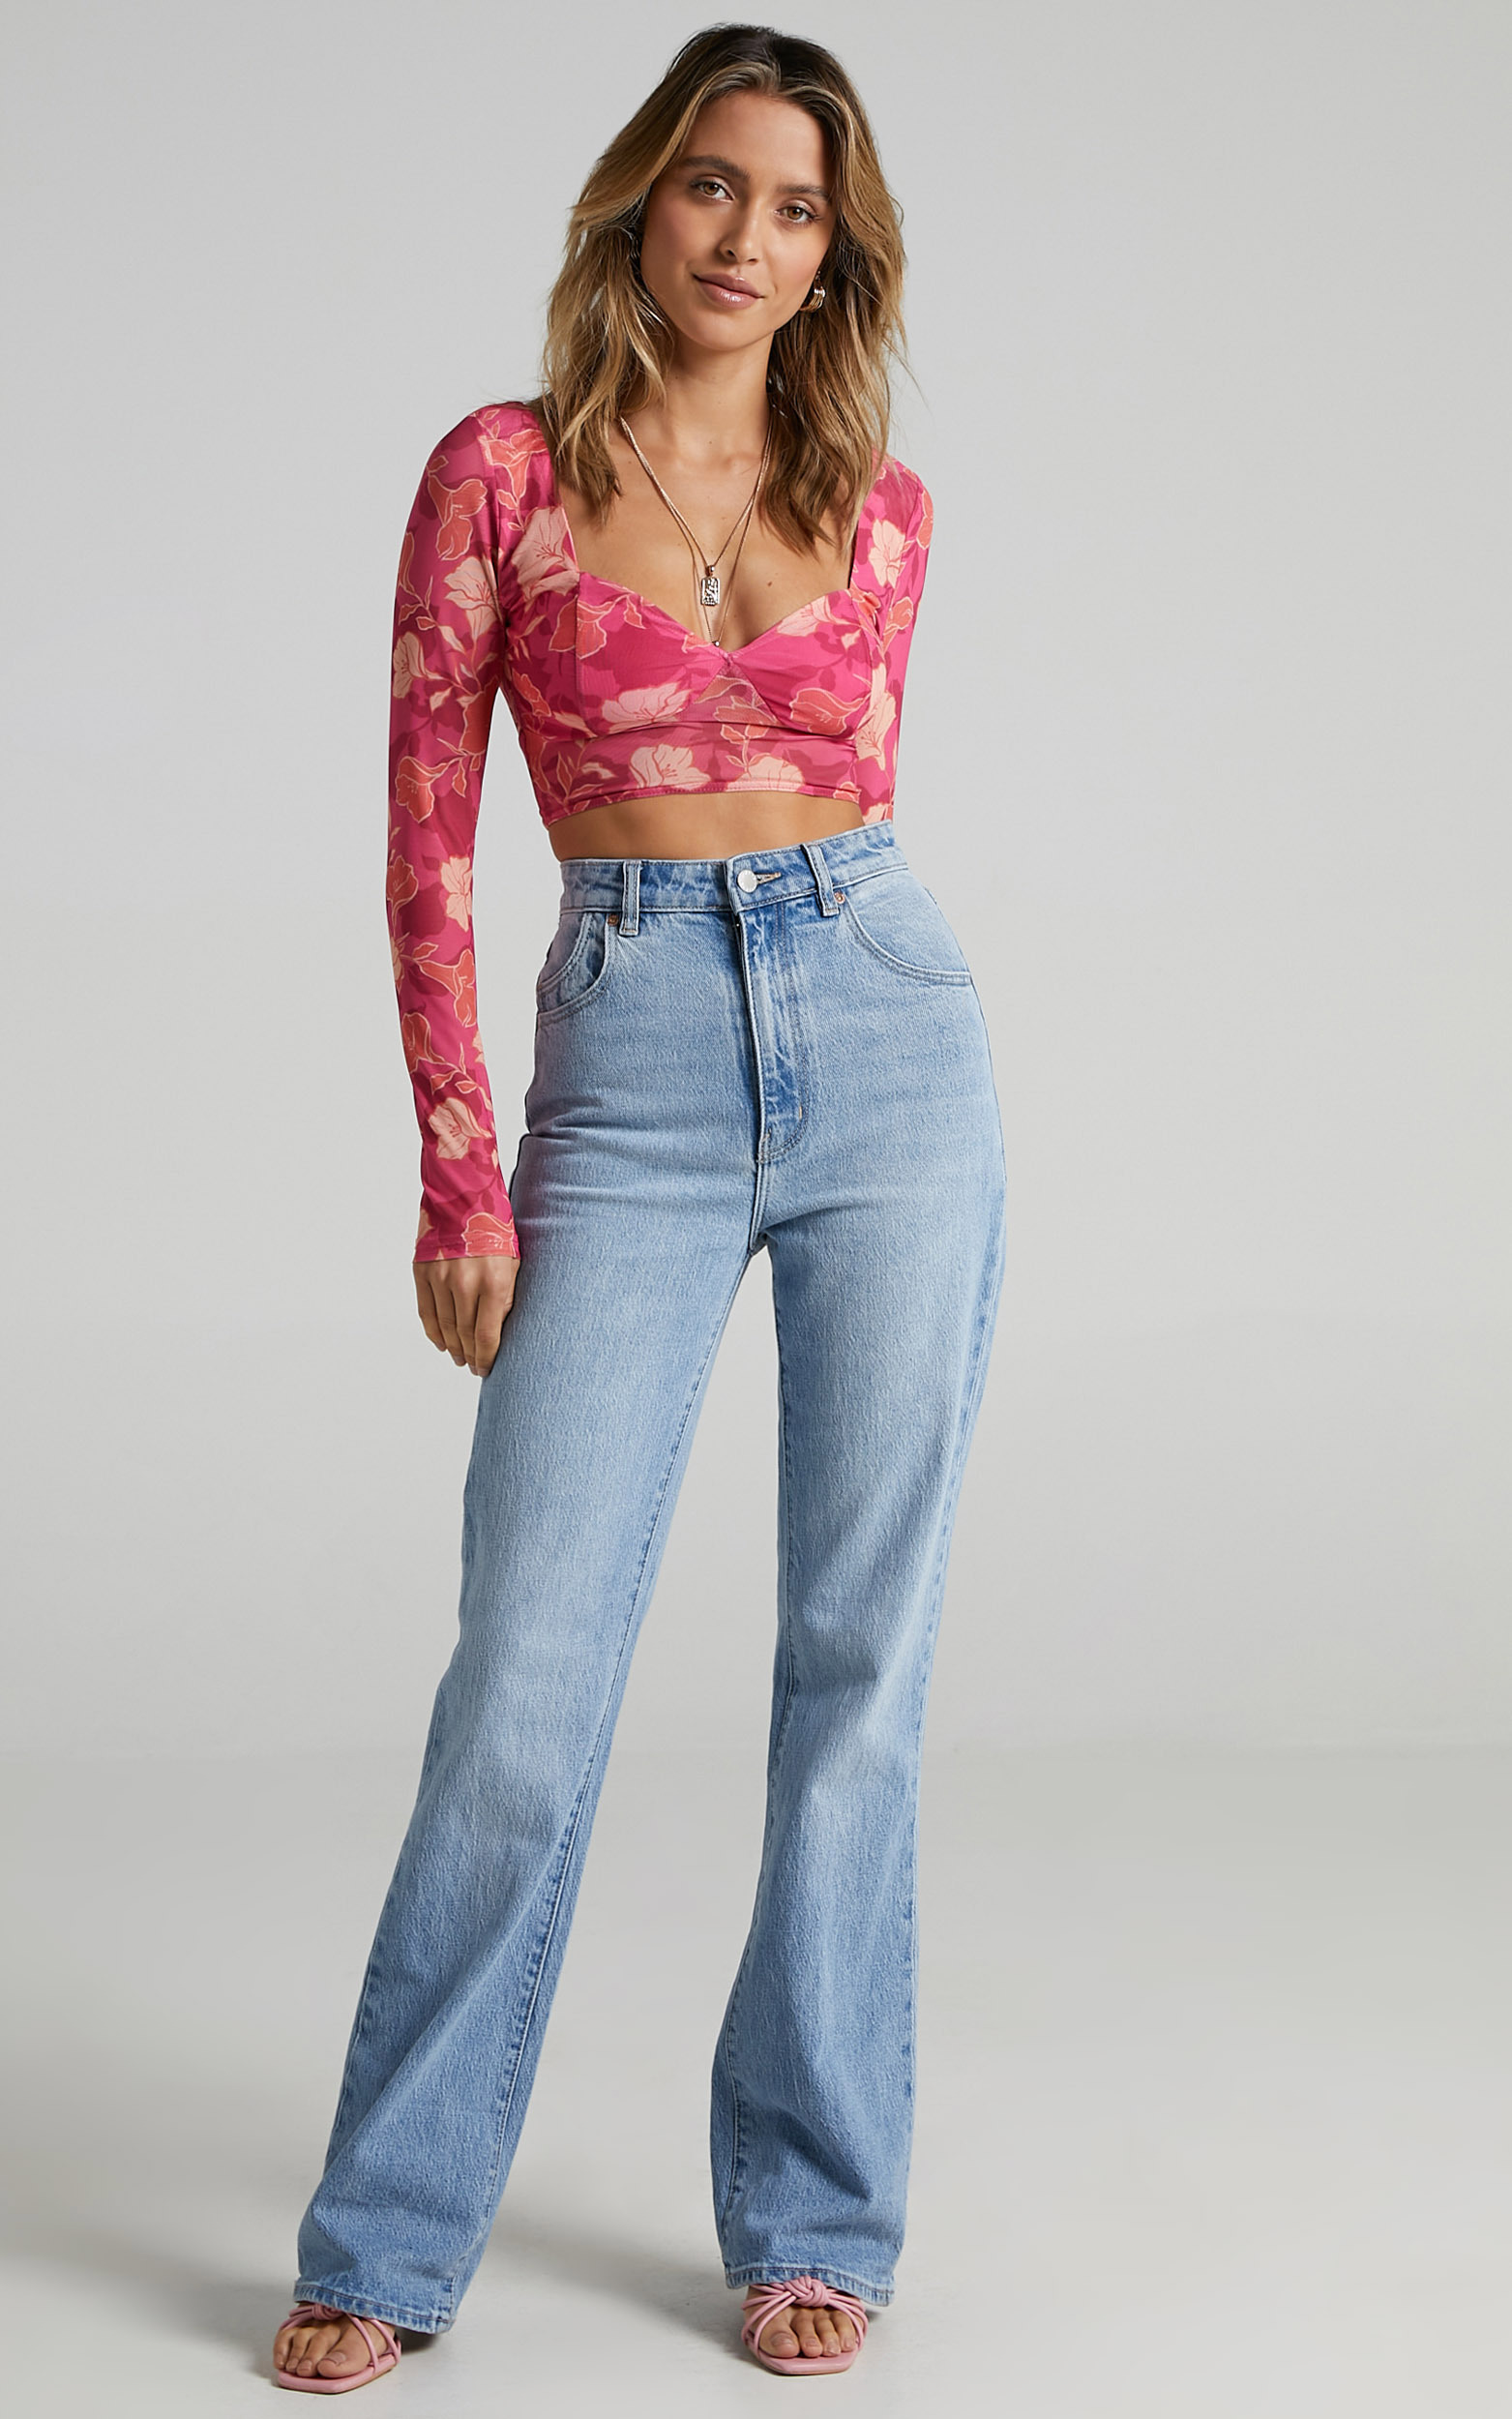 Eyes On You Top in Berry Floral - 06, PNK2, hi-res image number null